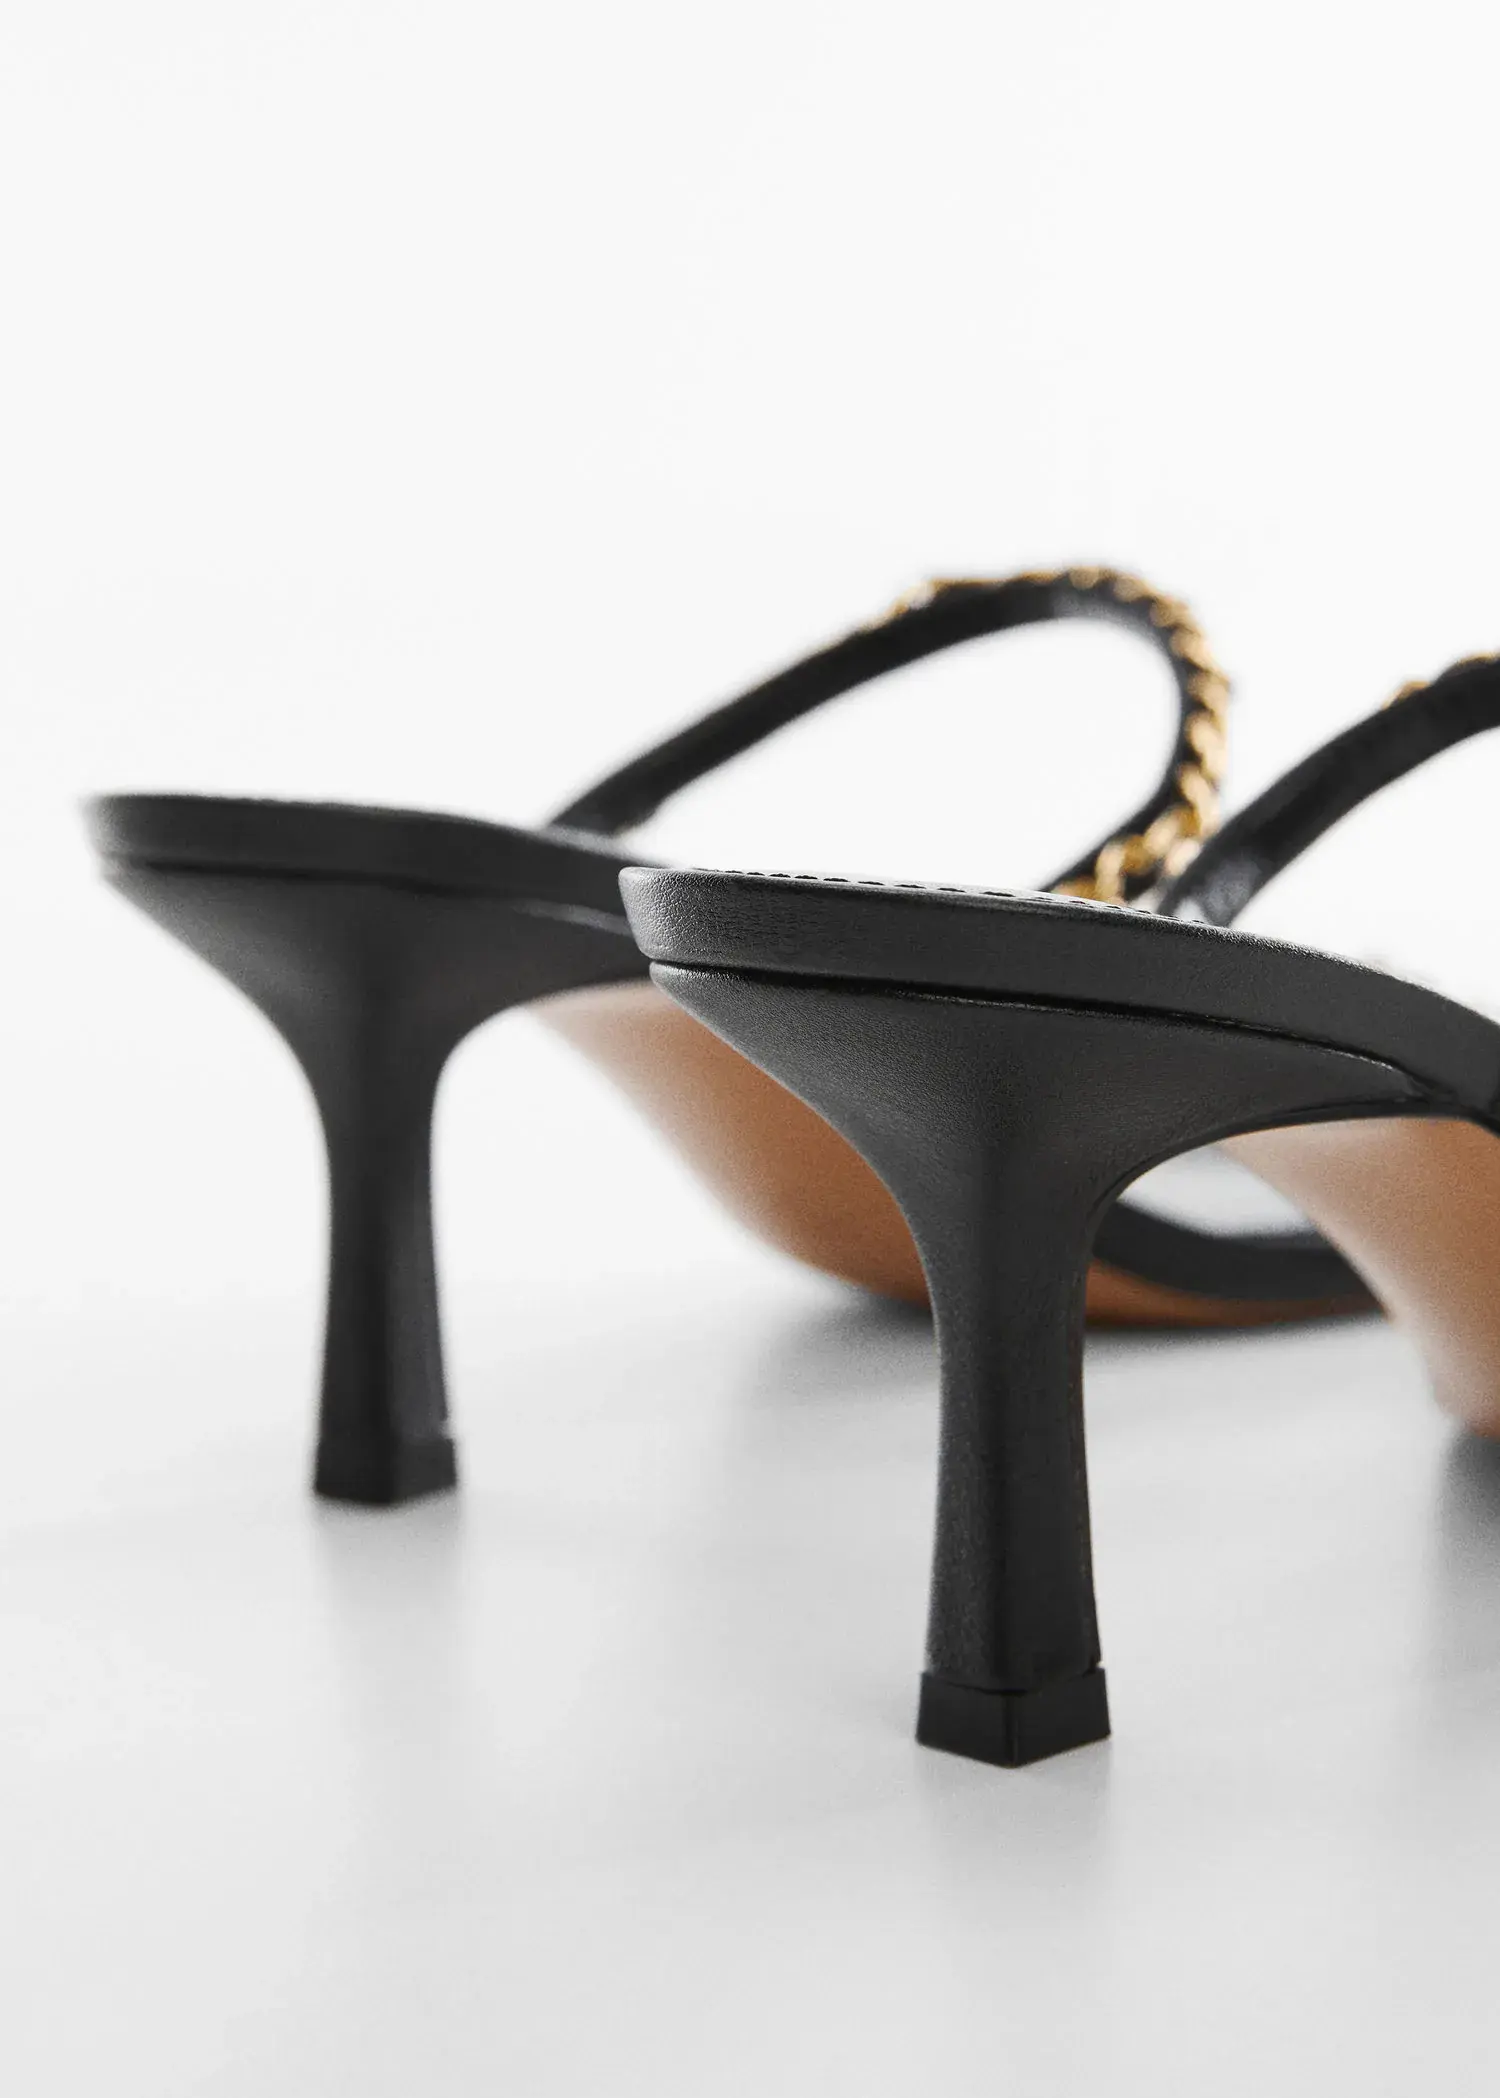 Mango High-heeled sandals with chain detail. a close up of a pair of shoes on a table 